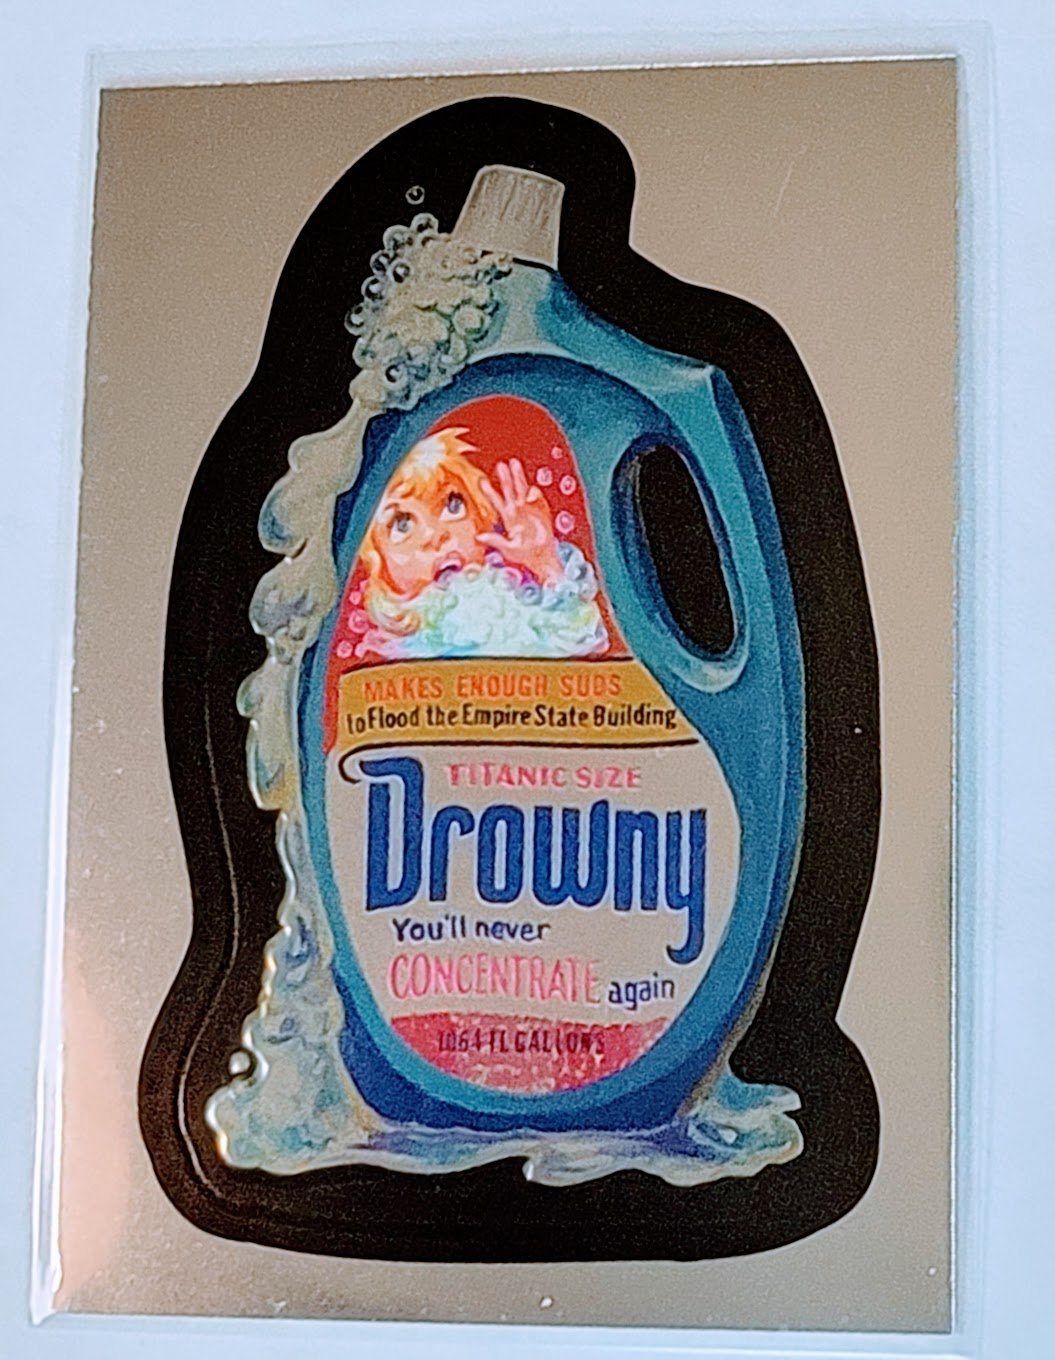 2014 Topps Chrome Wacky Packages Drowny Sticker Trading Card MCSC1 simple Xclusive Collectibles   